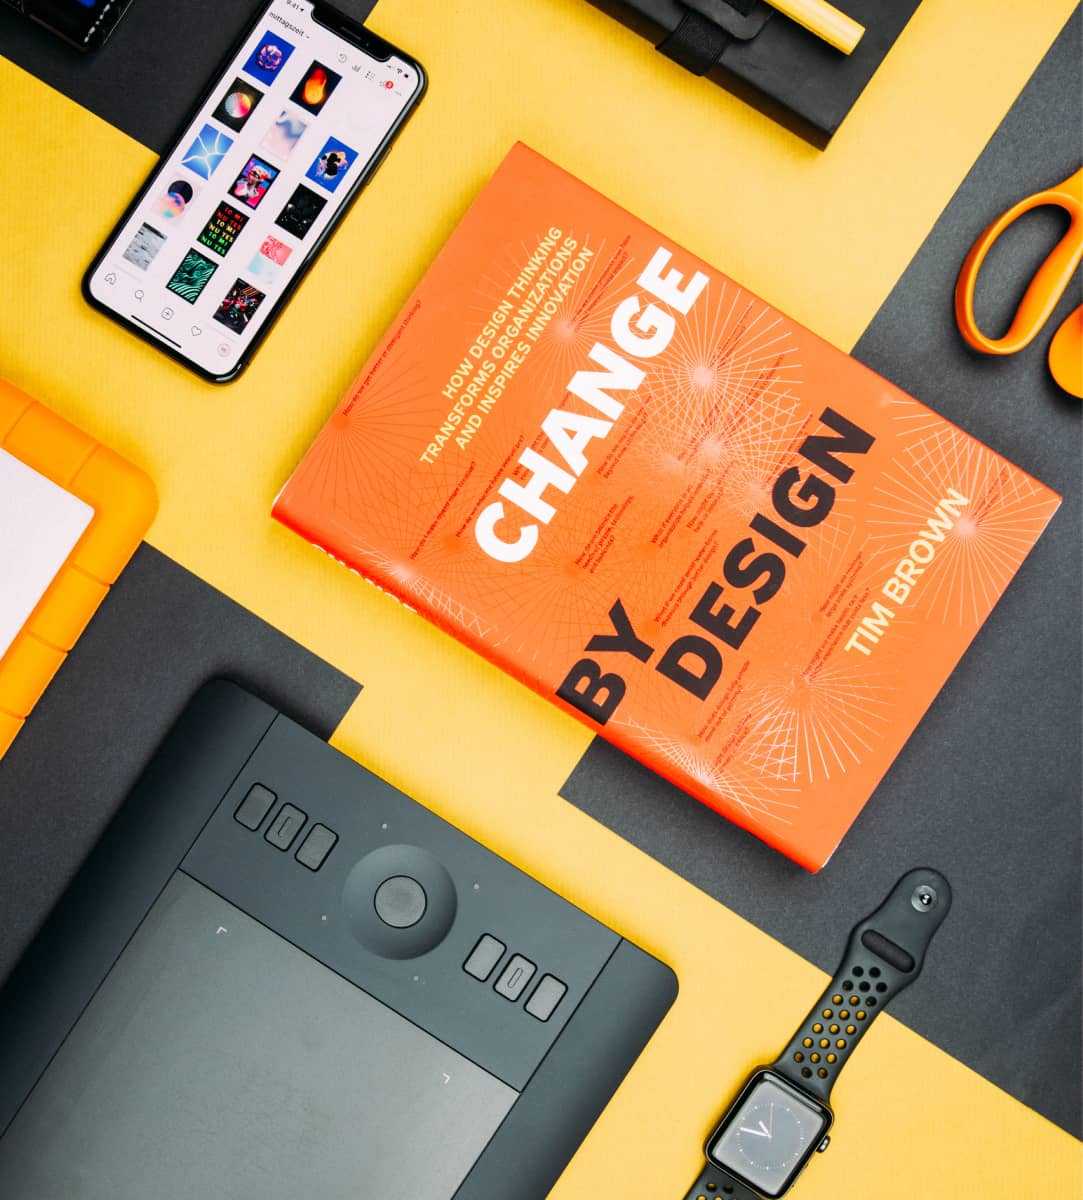 Change by Design by Tim Brown book beside smartphone on a table